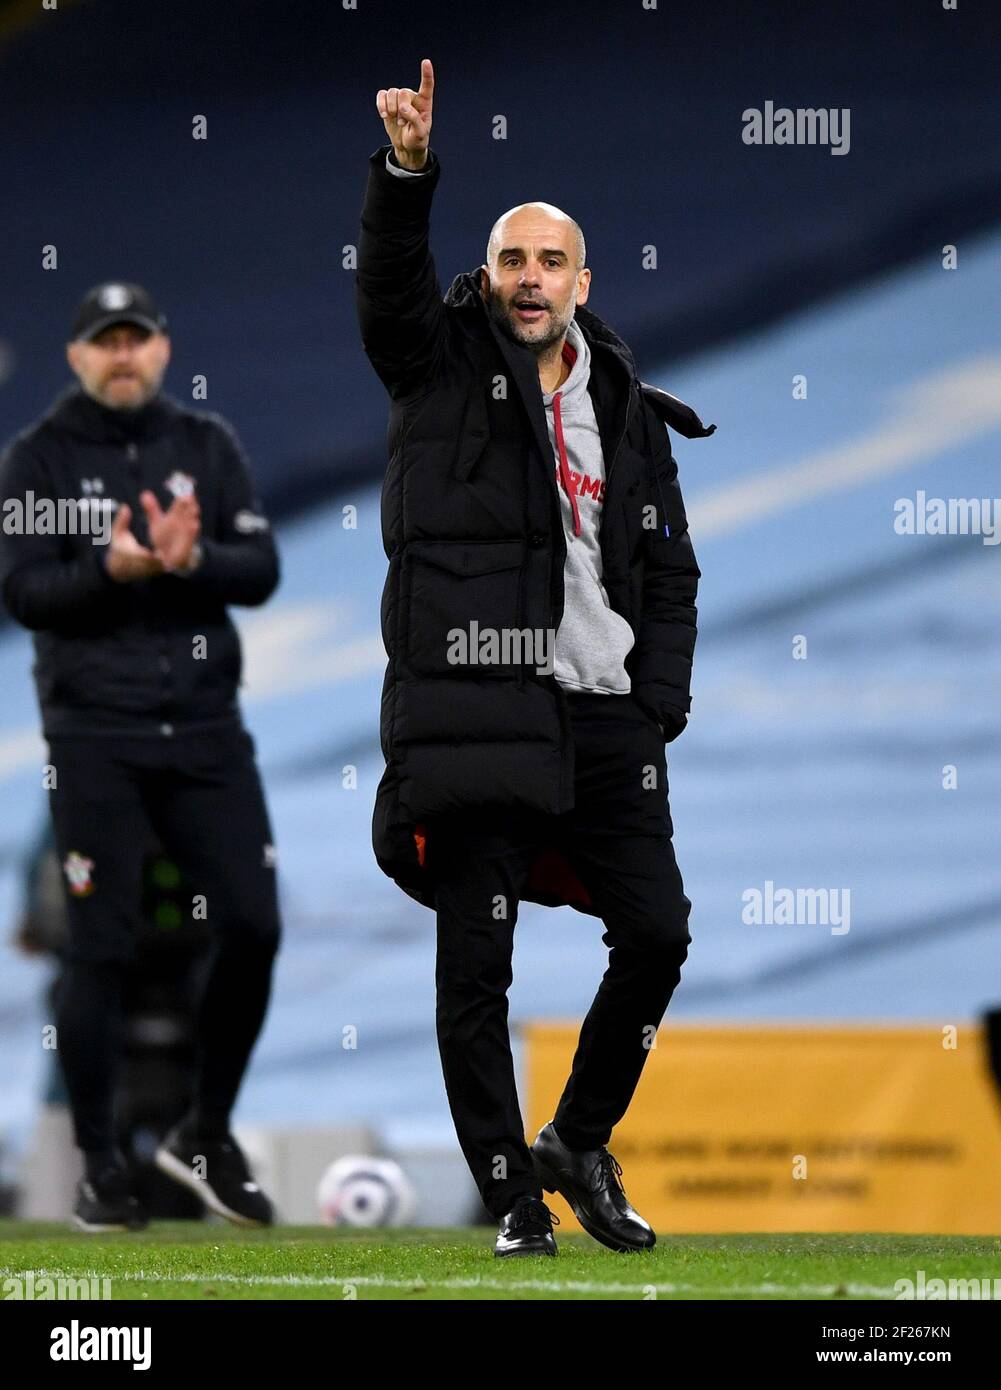 Manchester City manager Pep Guardiola gestures on the touchline during the Premier League match at the Etihad Stadium, Manchester. Picture date: Wednesday March 10, 2021. Stock Photo